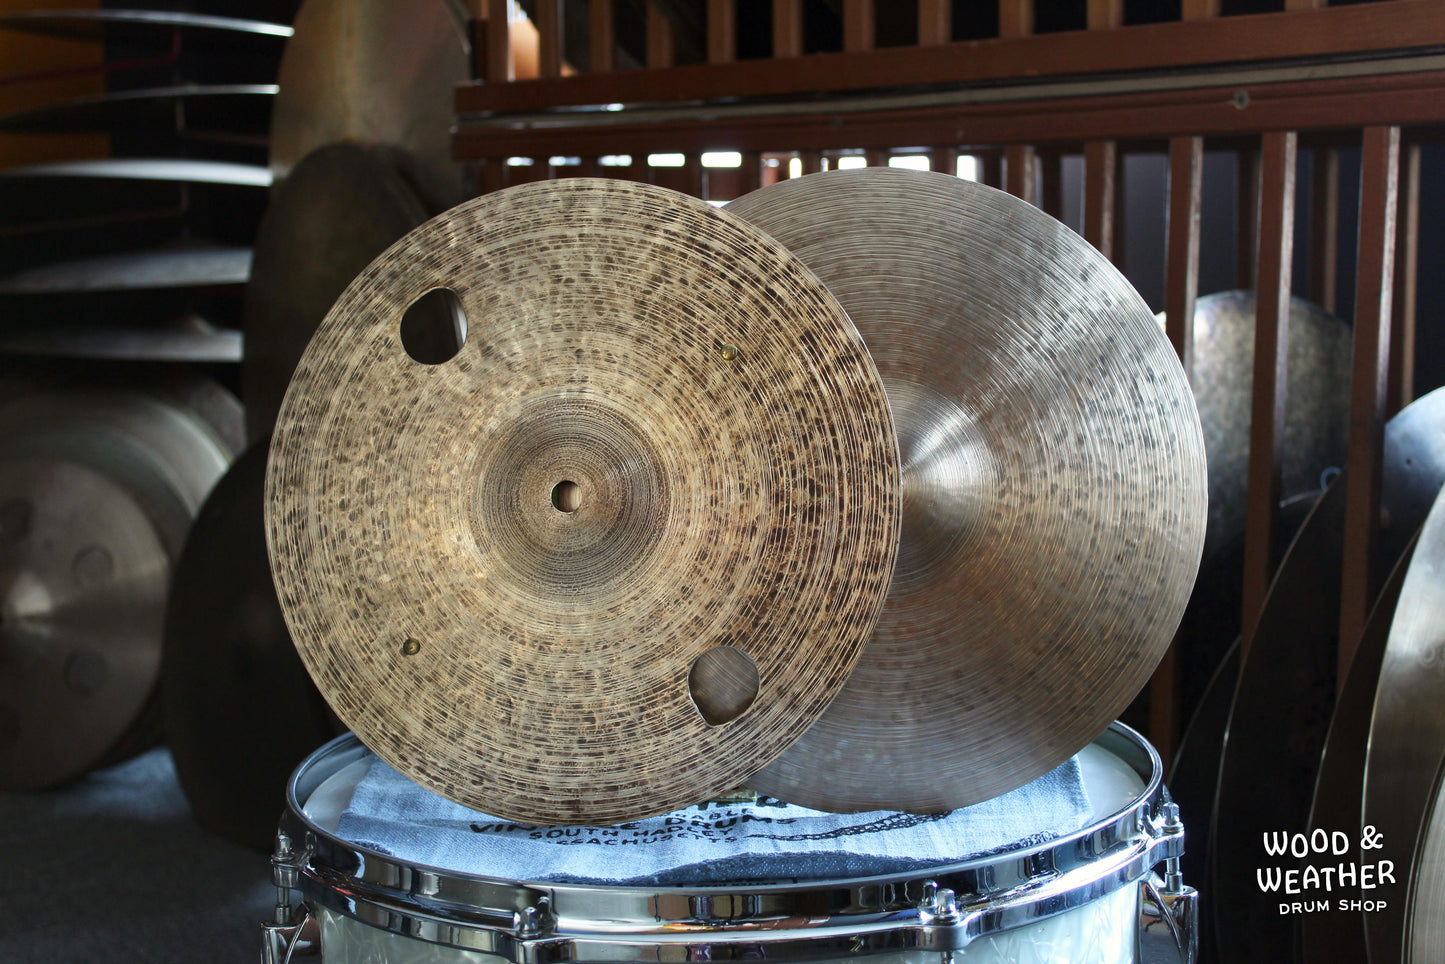 Used 13" Unknown Brand Vented Riveted Hi Hat Cymbals 730/764g